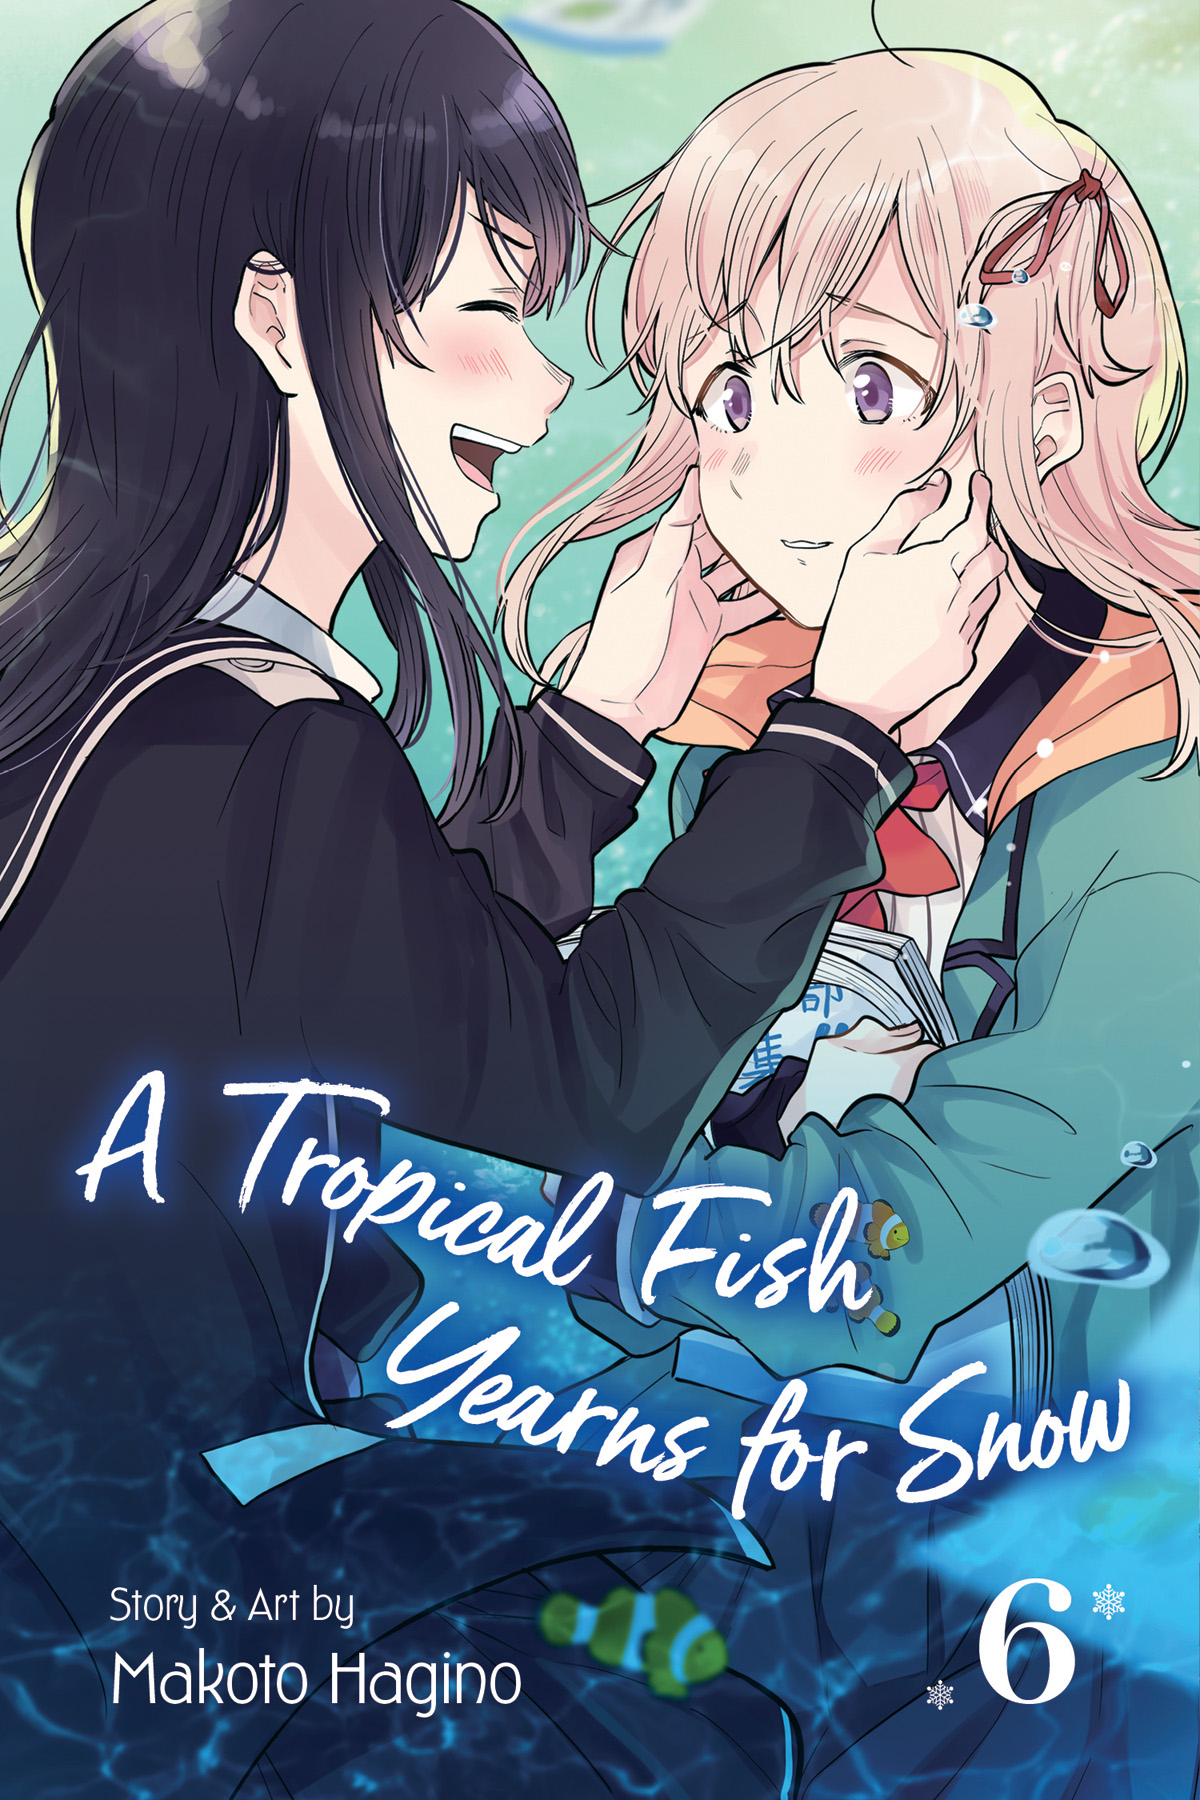 A Tropical Fish Yearns For Snow Manga Volume 6